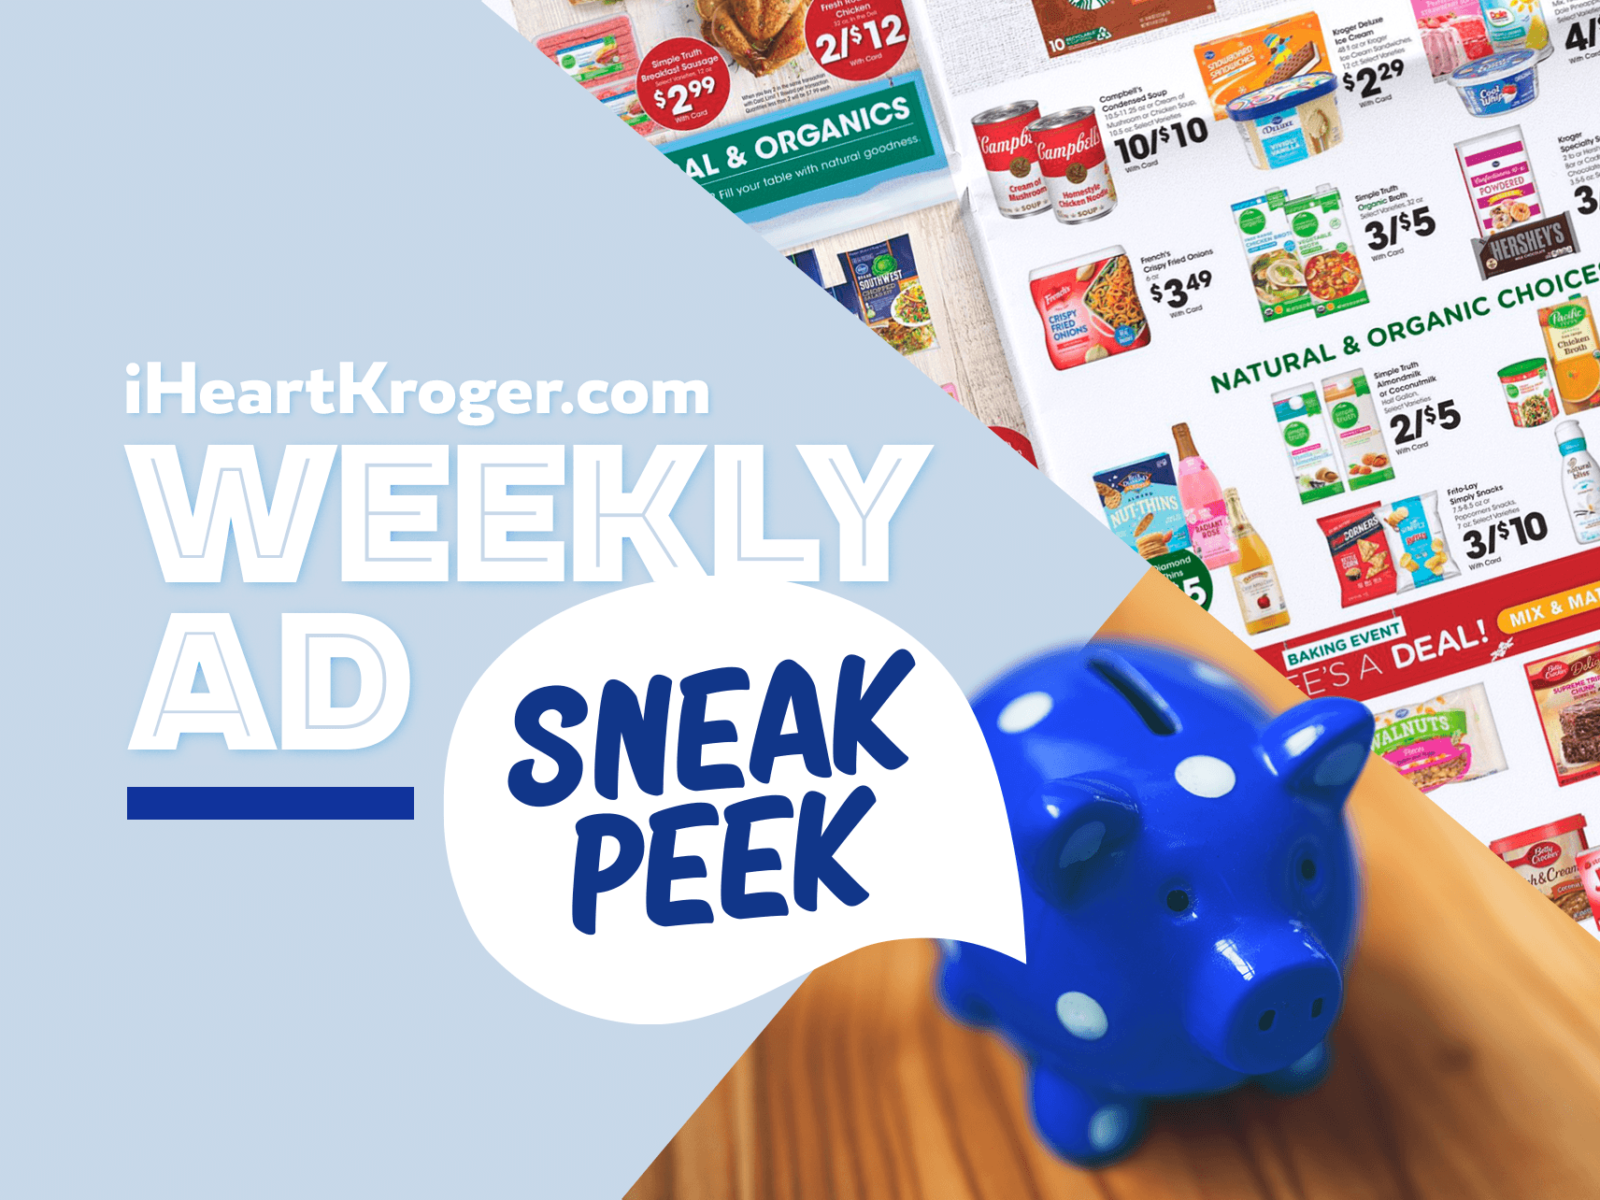 Kroger Ad & Coupons Week Of 11/25 to 11/29